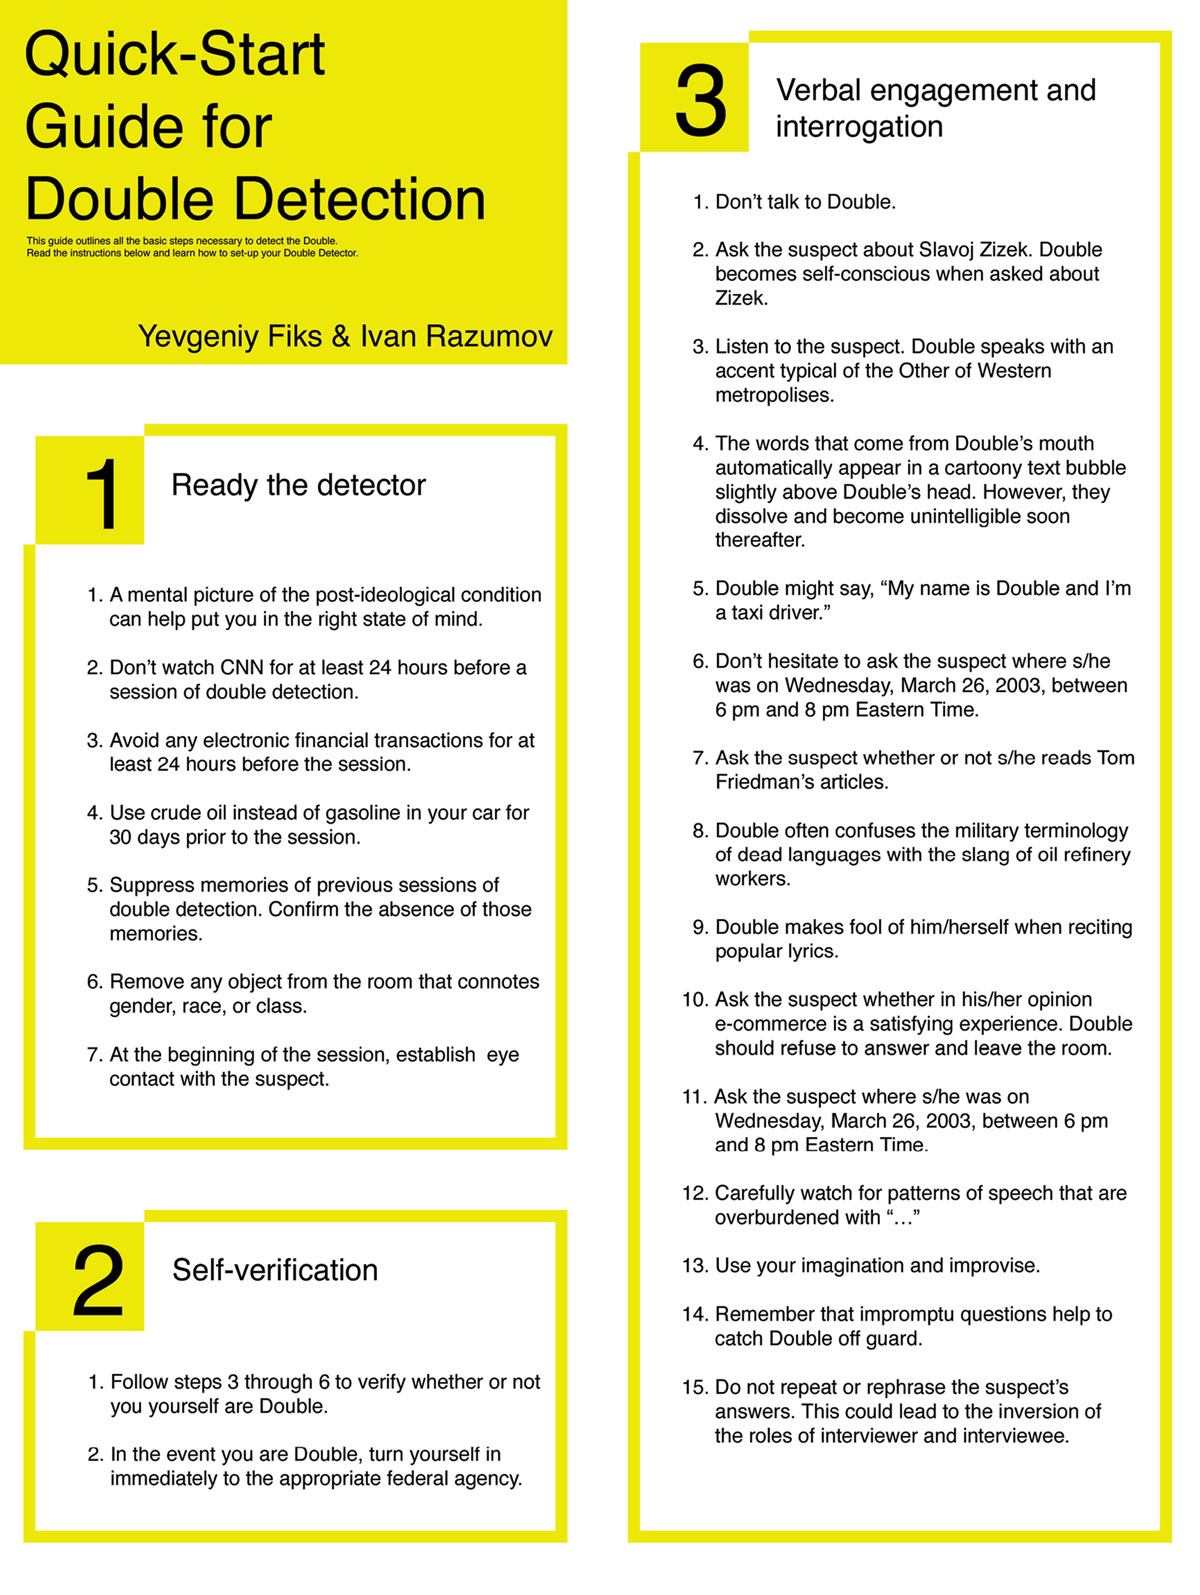 Steps 1 through 3 of the quick-start guide for doubles detection.